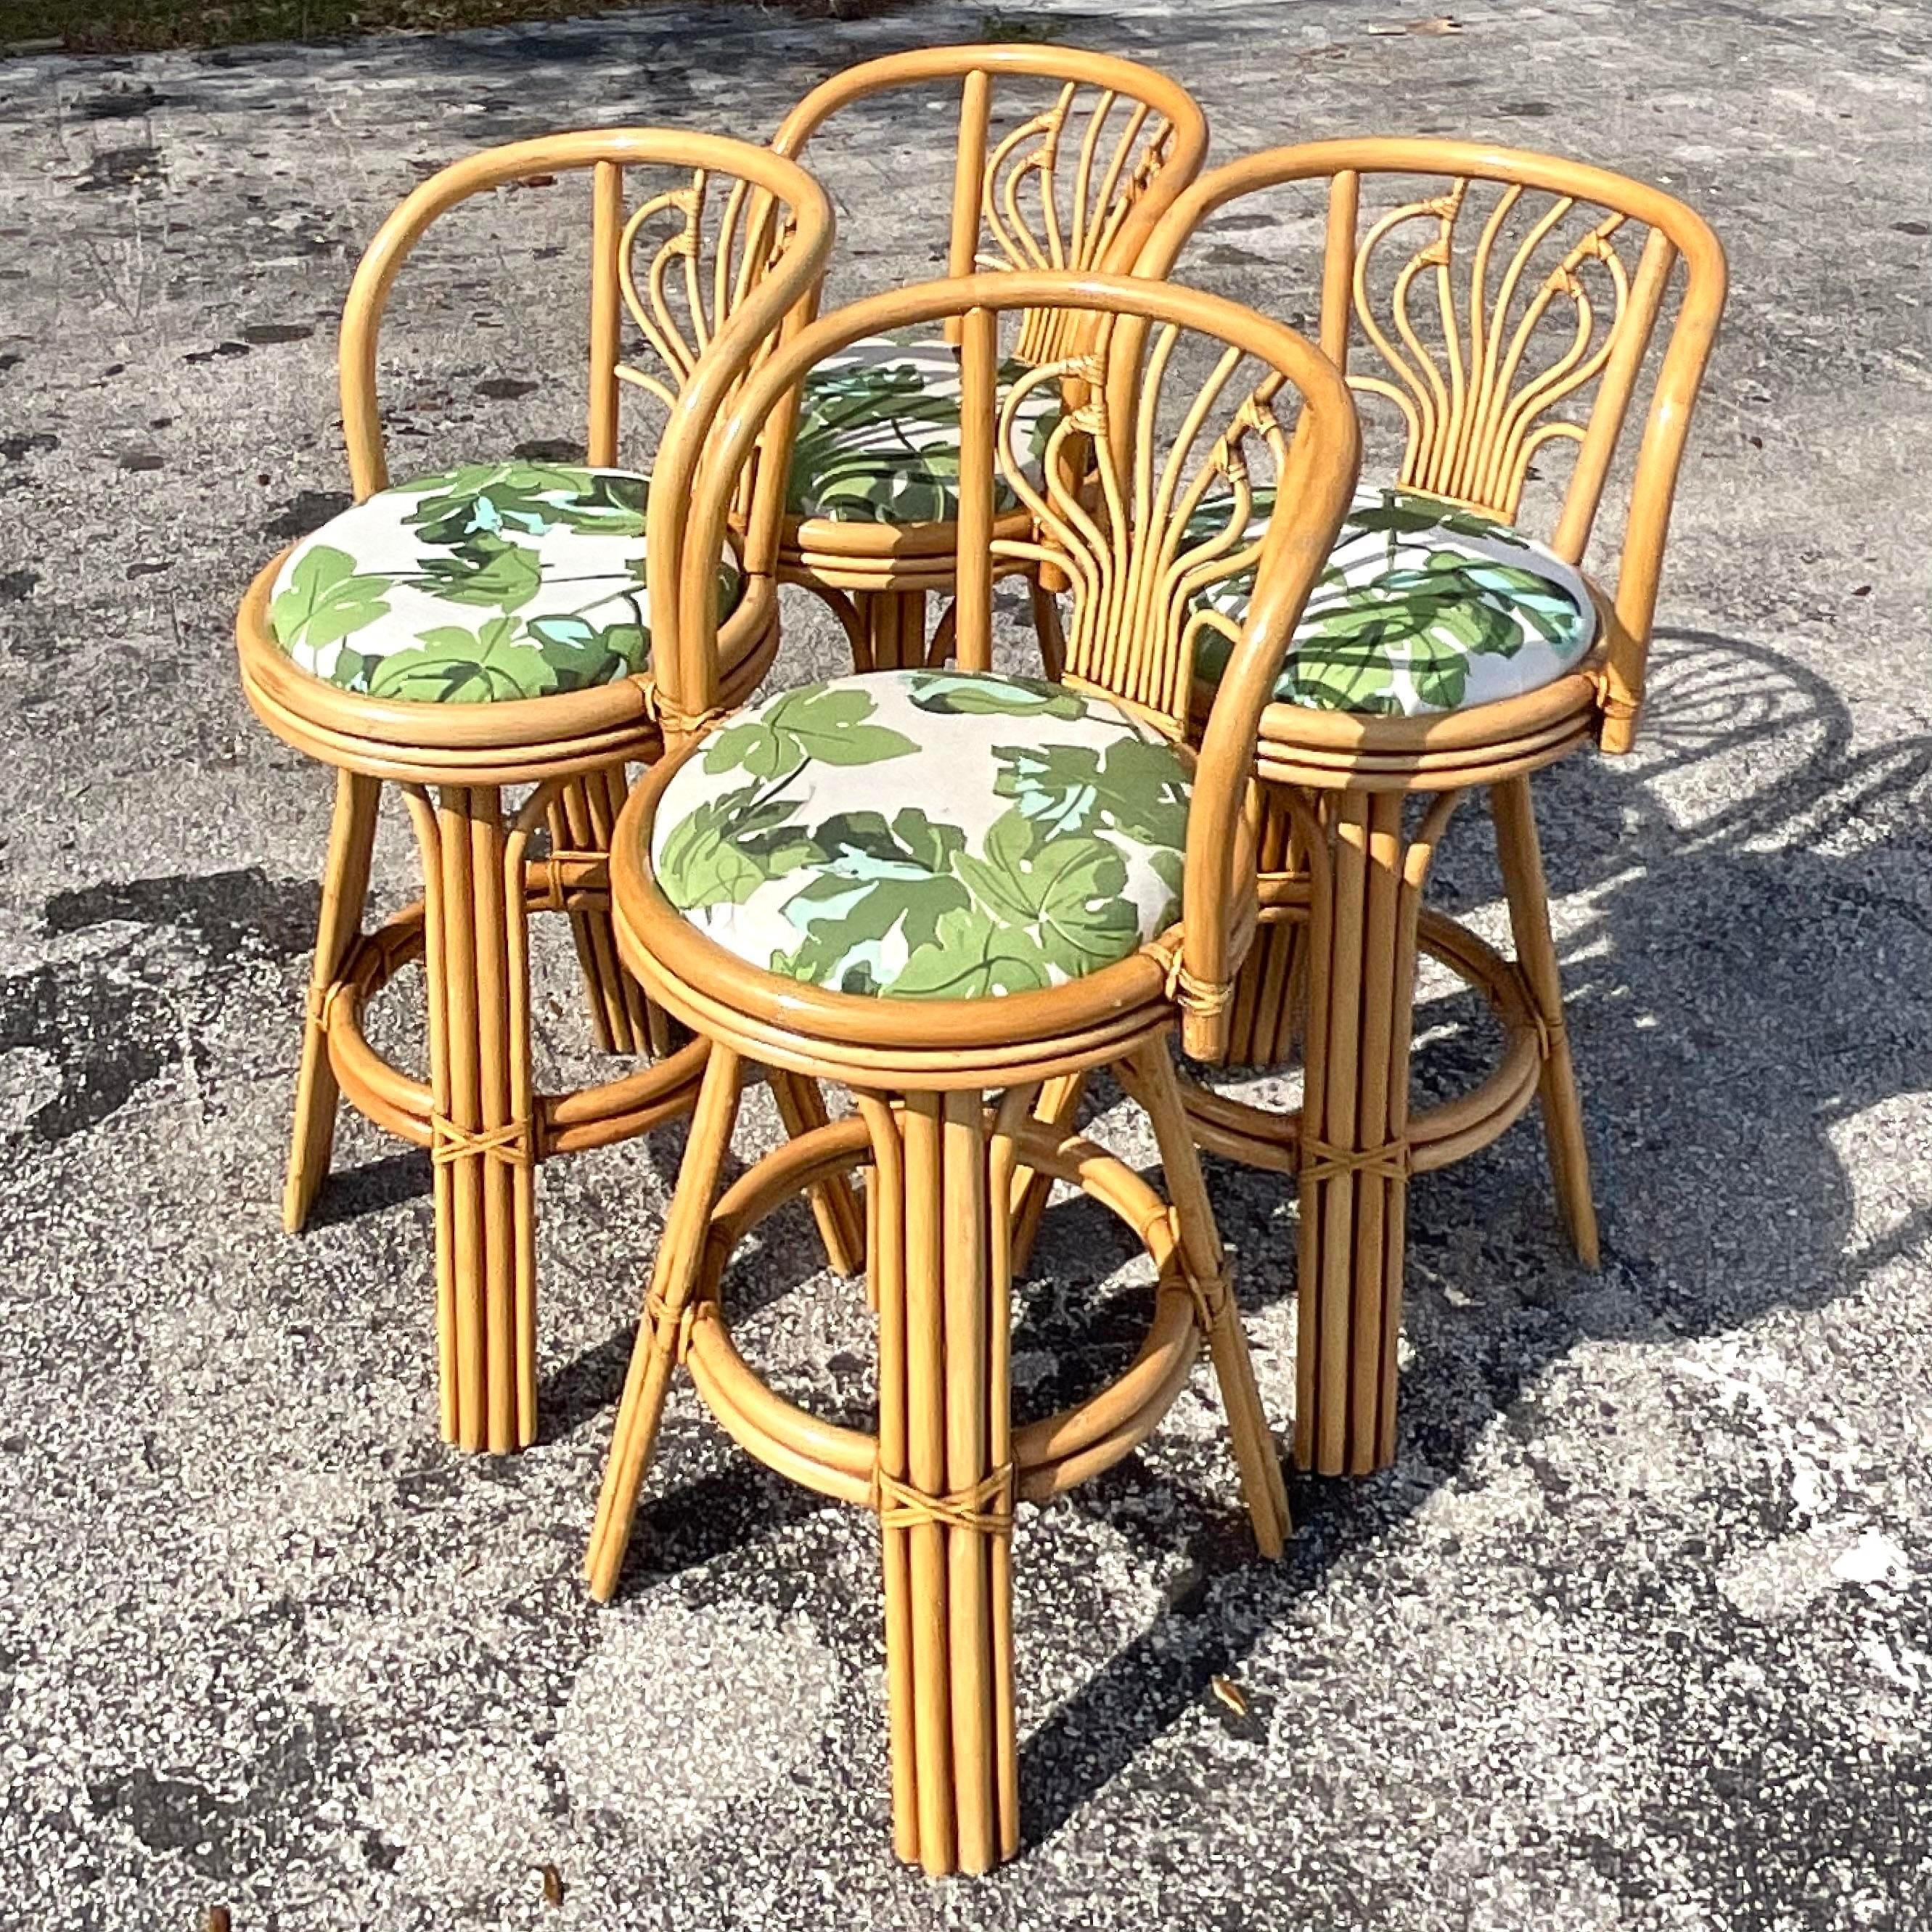 A fabulous set of four vintage Coastal barstools. A chic bent rattan with a fabulous squiggle design on the seat back. Beautiful tropical print upholstery. Acquired from a Palm Beach estate.